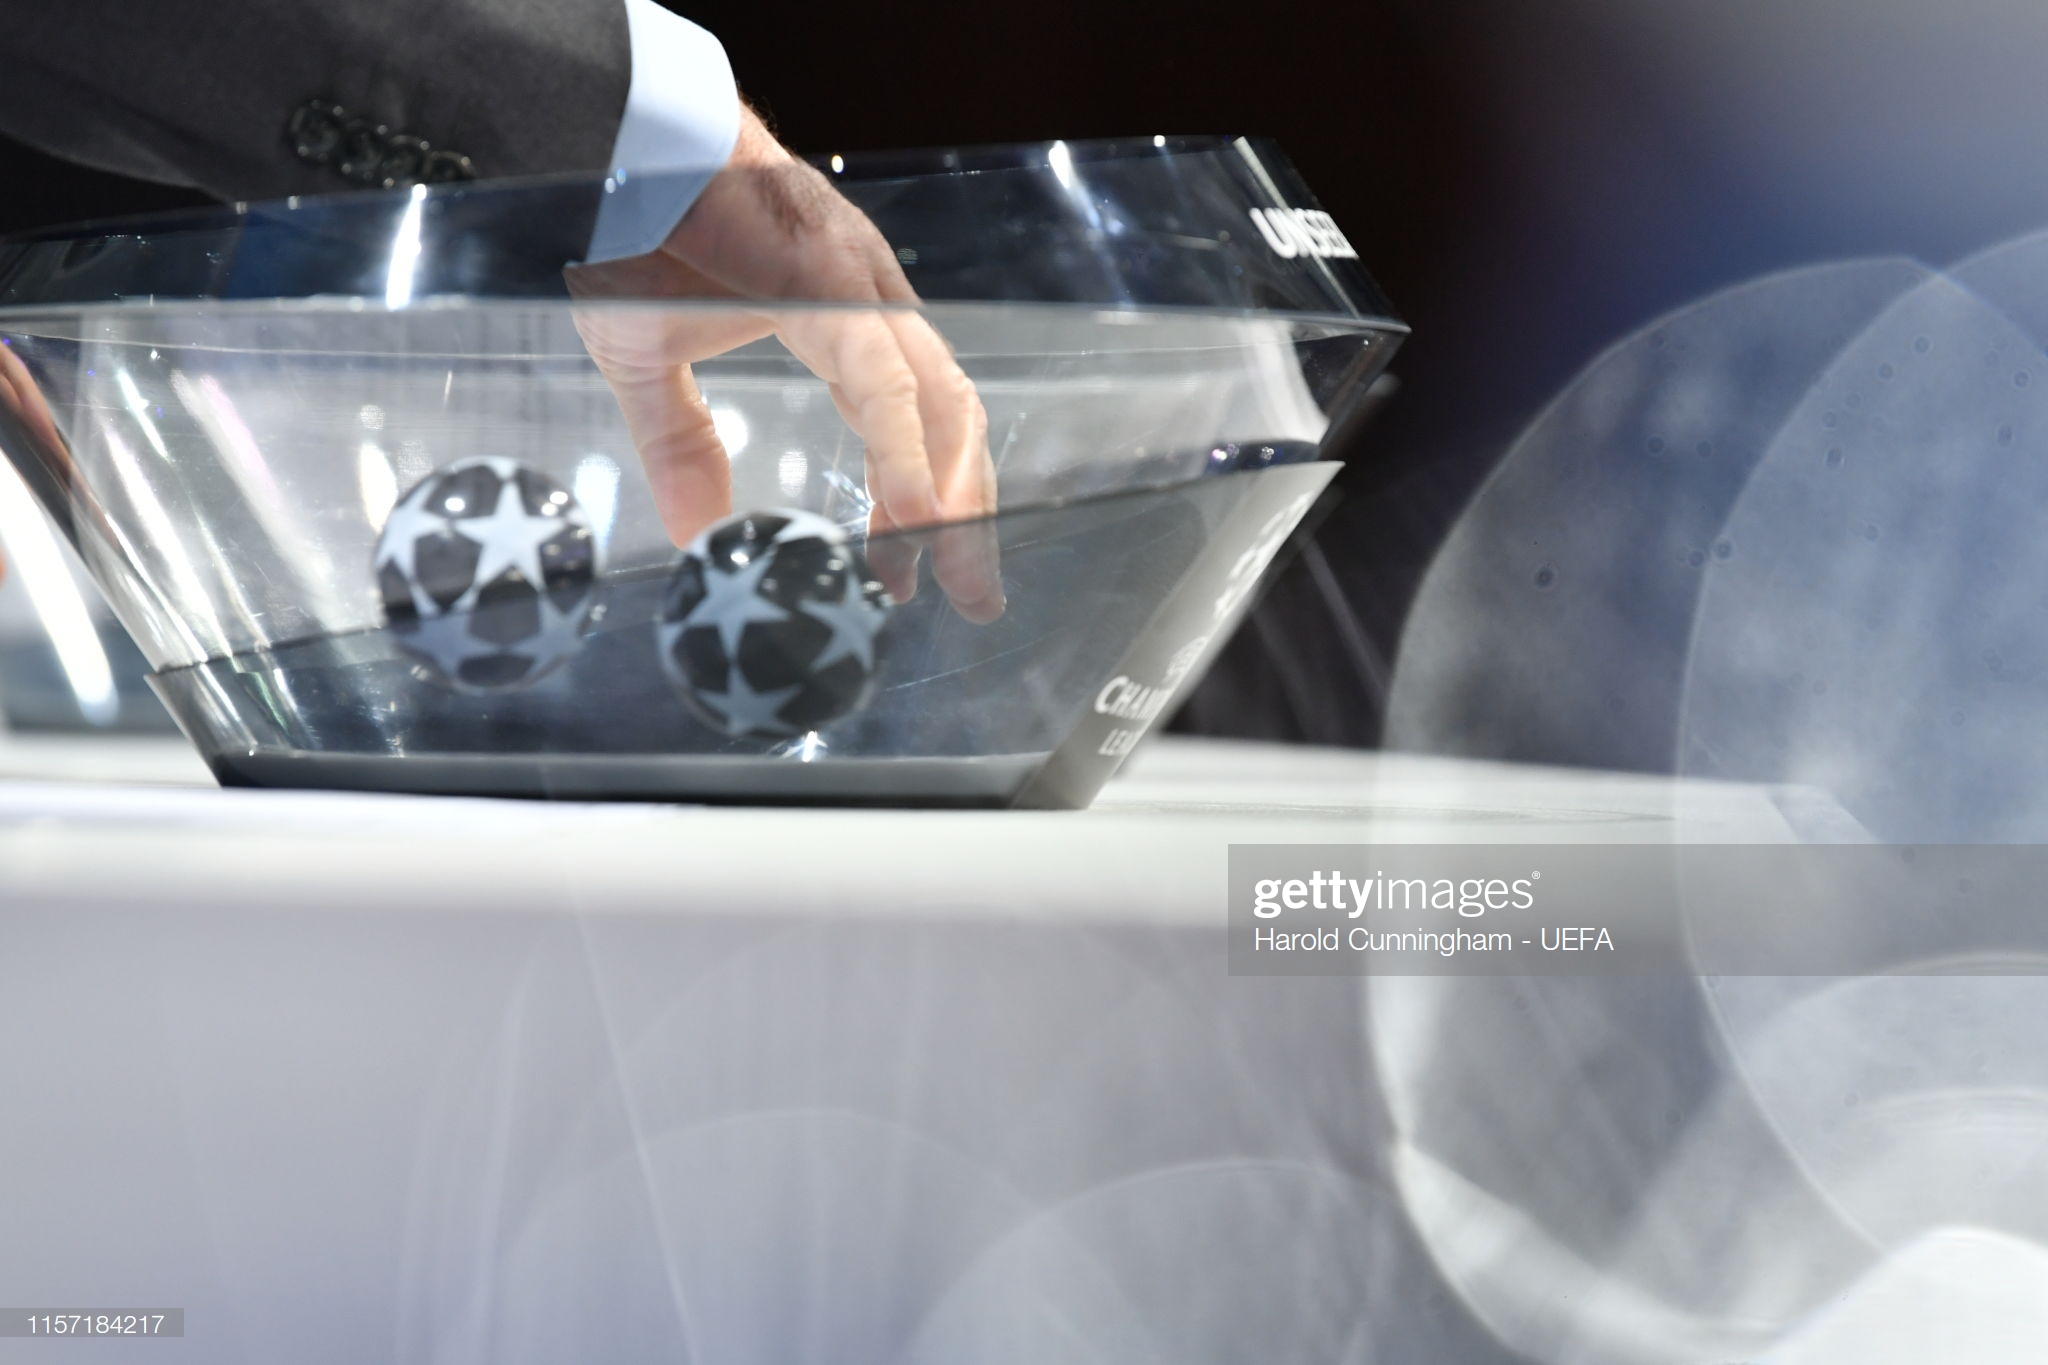 gettyimages-1157184217-2048x2048.jpg